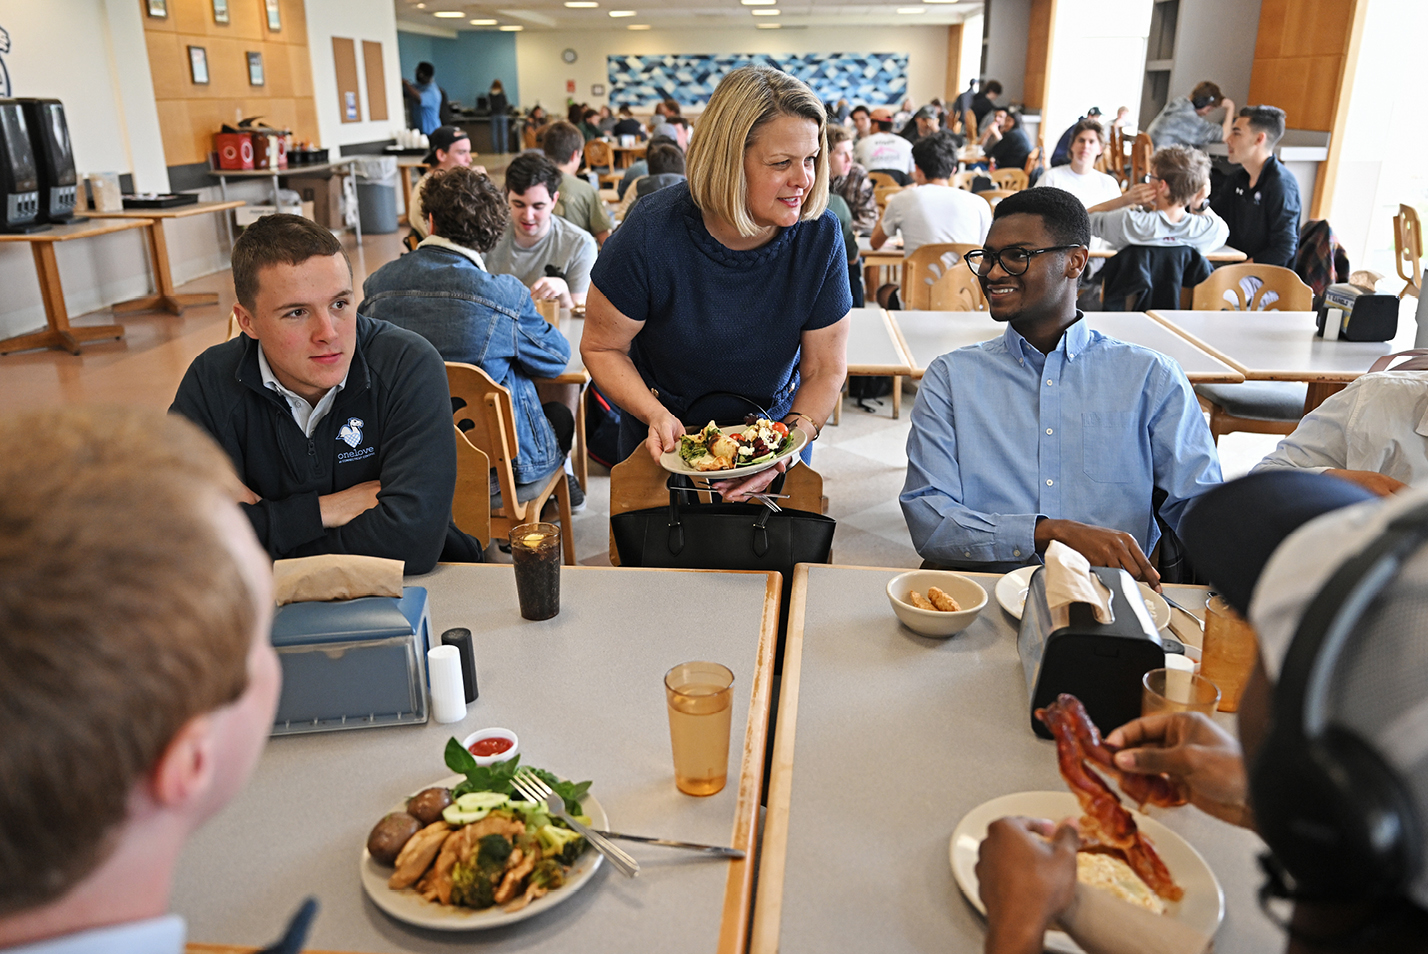 President-elect Chapdelaine greets students at lunch.